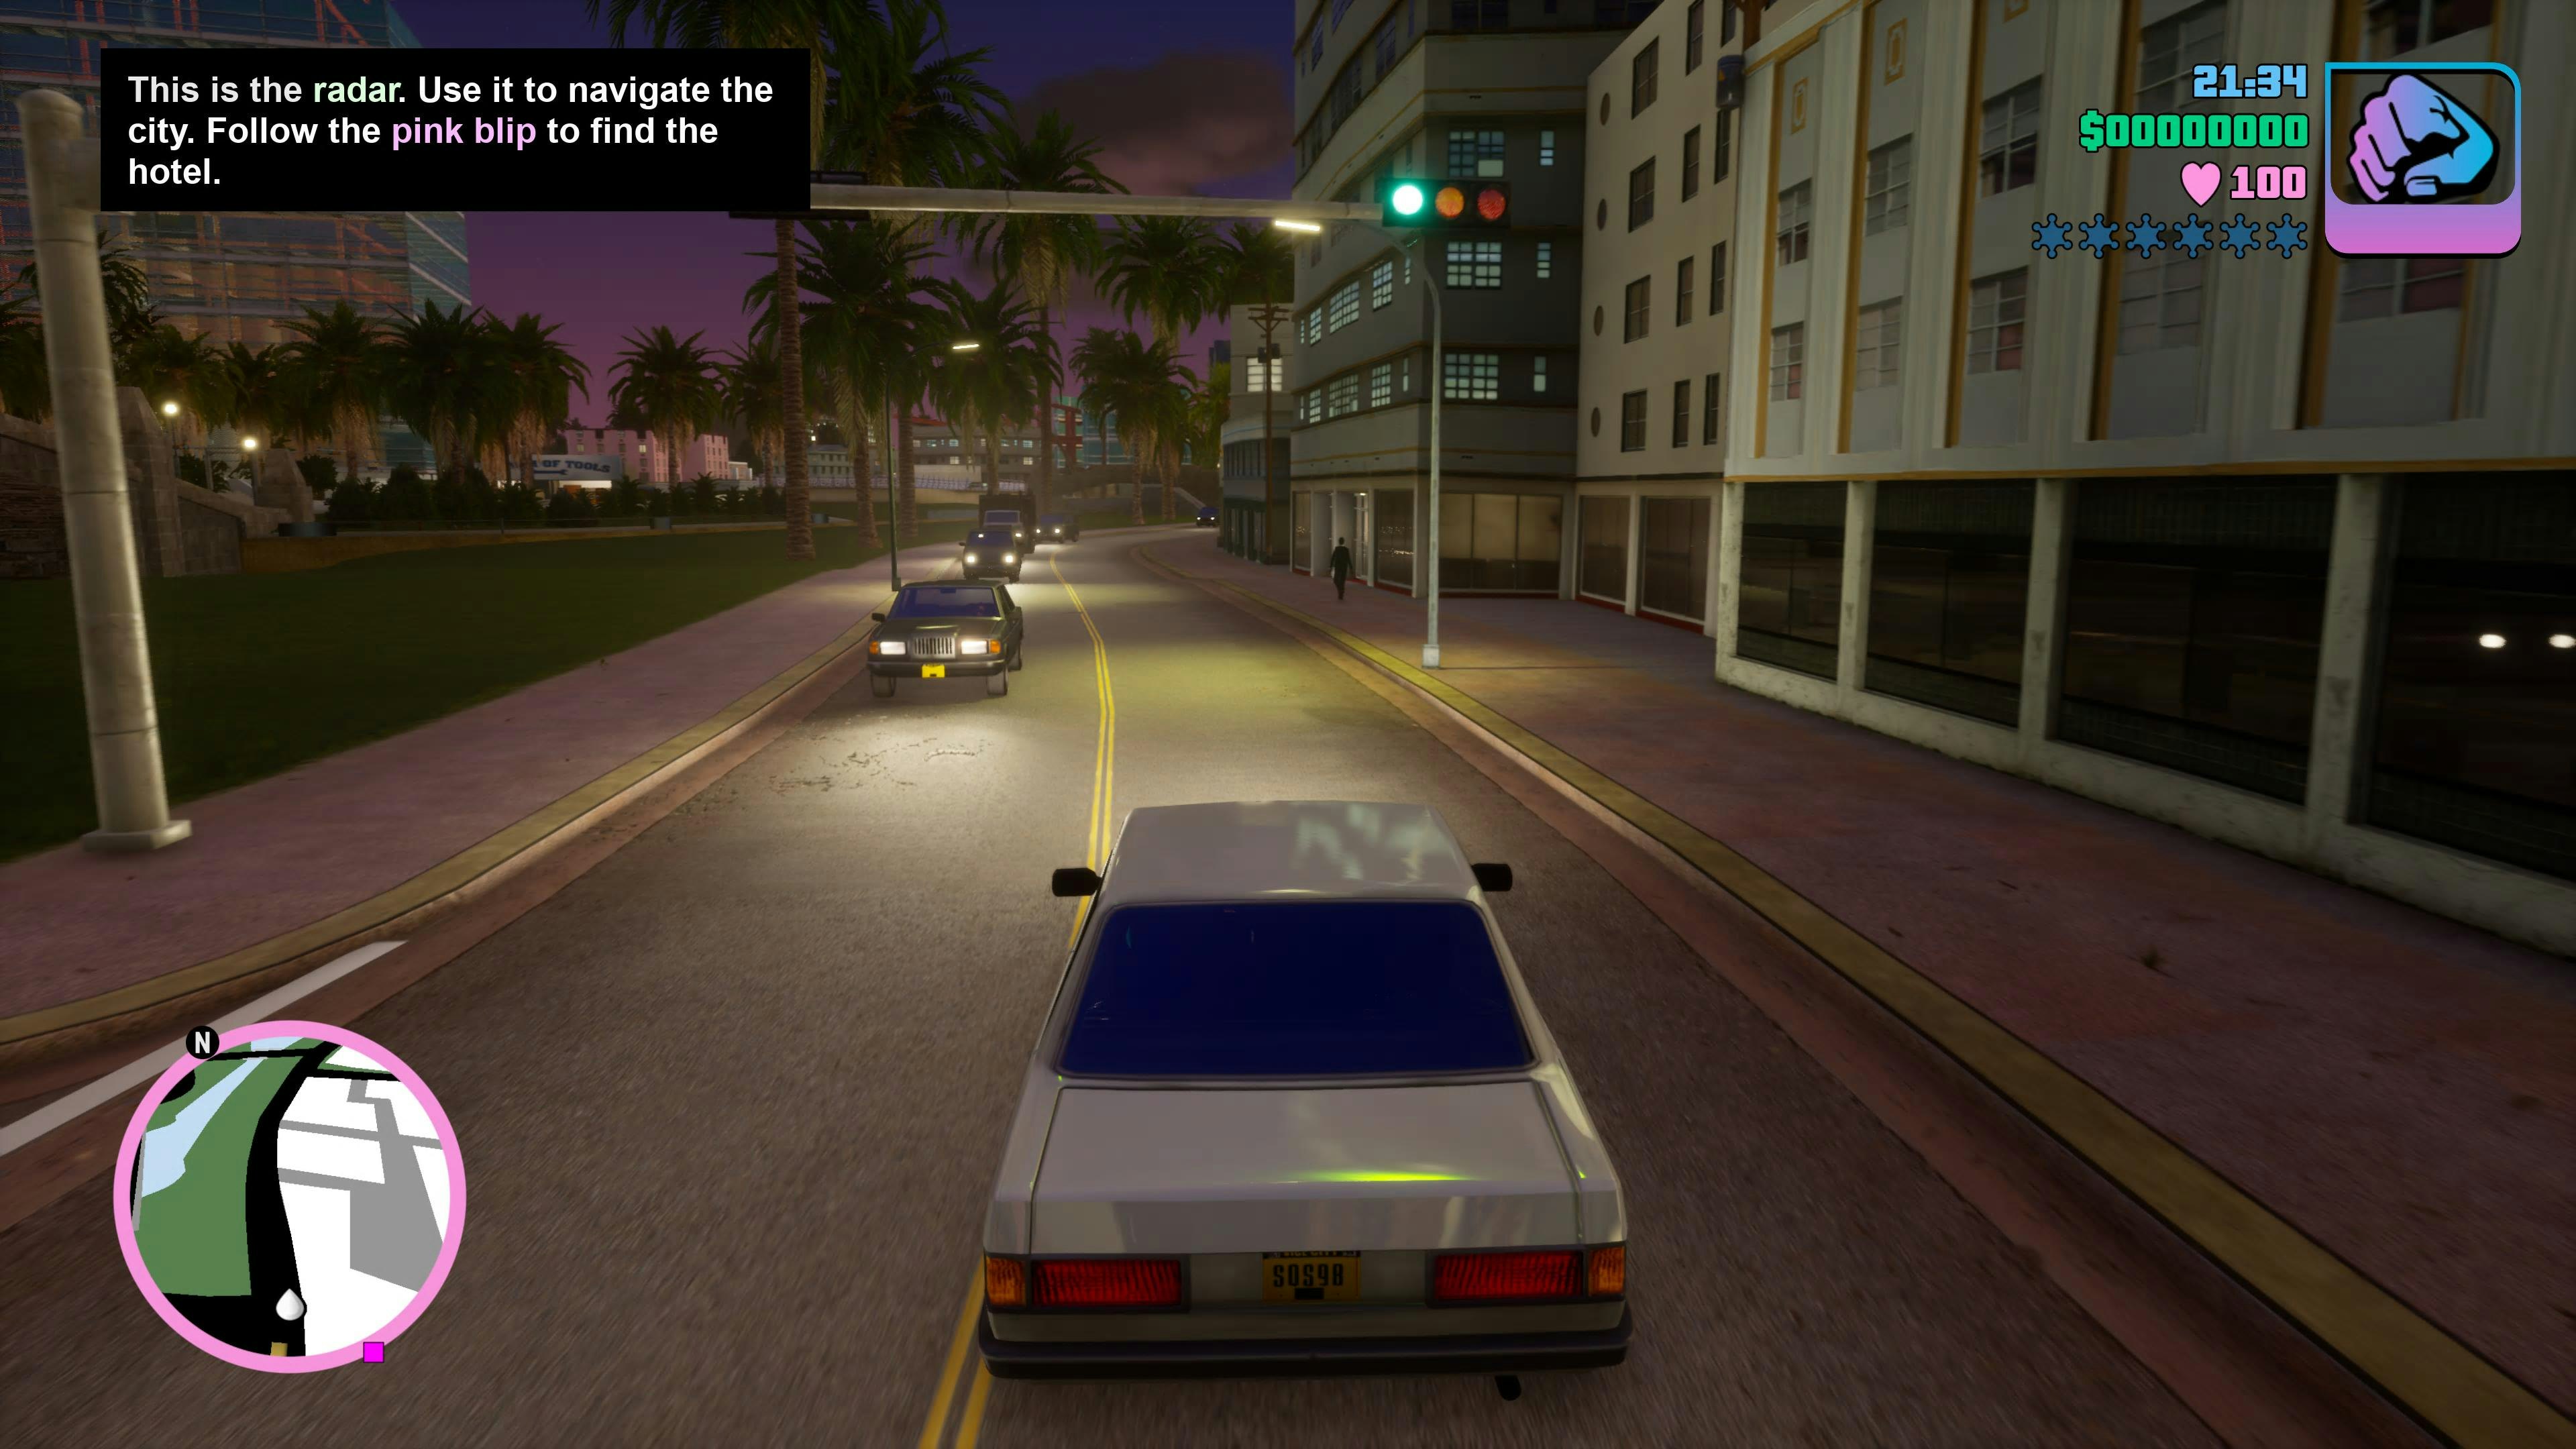 GTA Vice City cheats, All codes for Xbox, PC, Switch & PlayStation